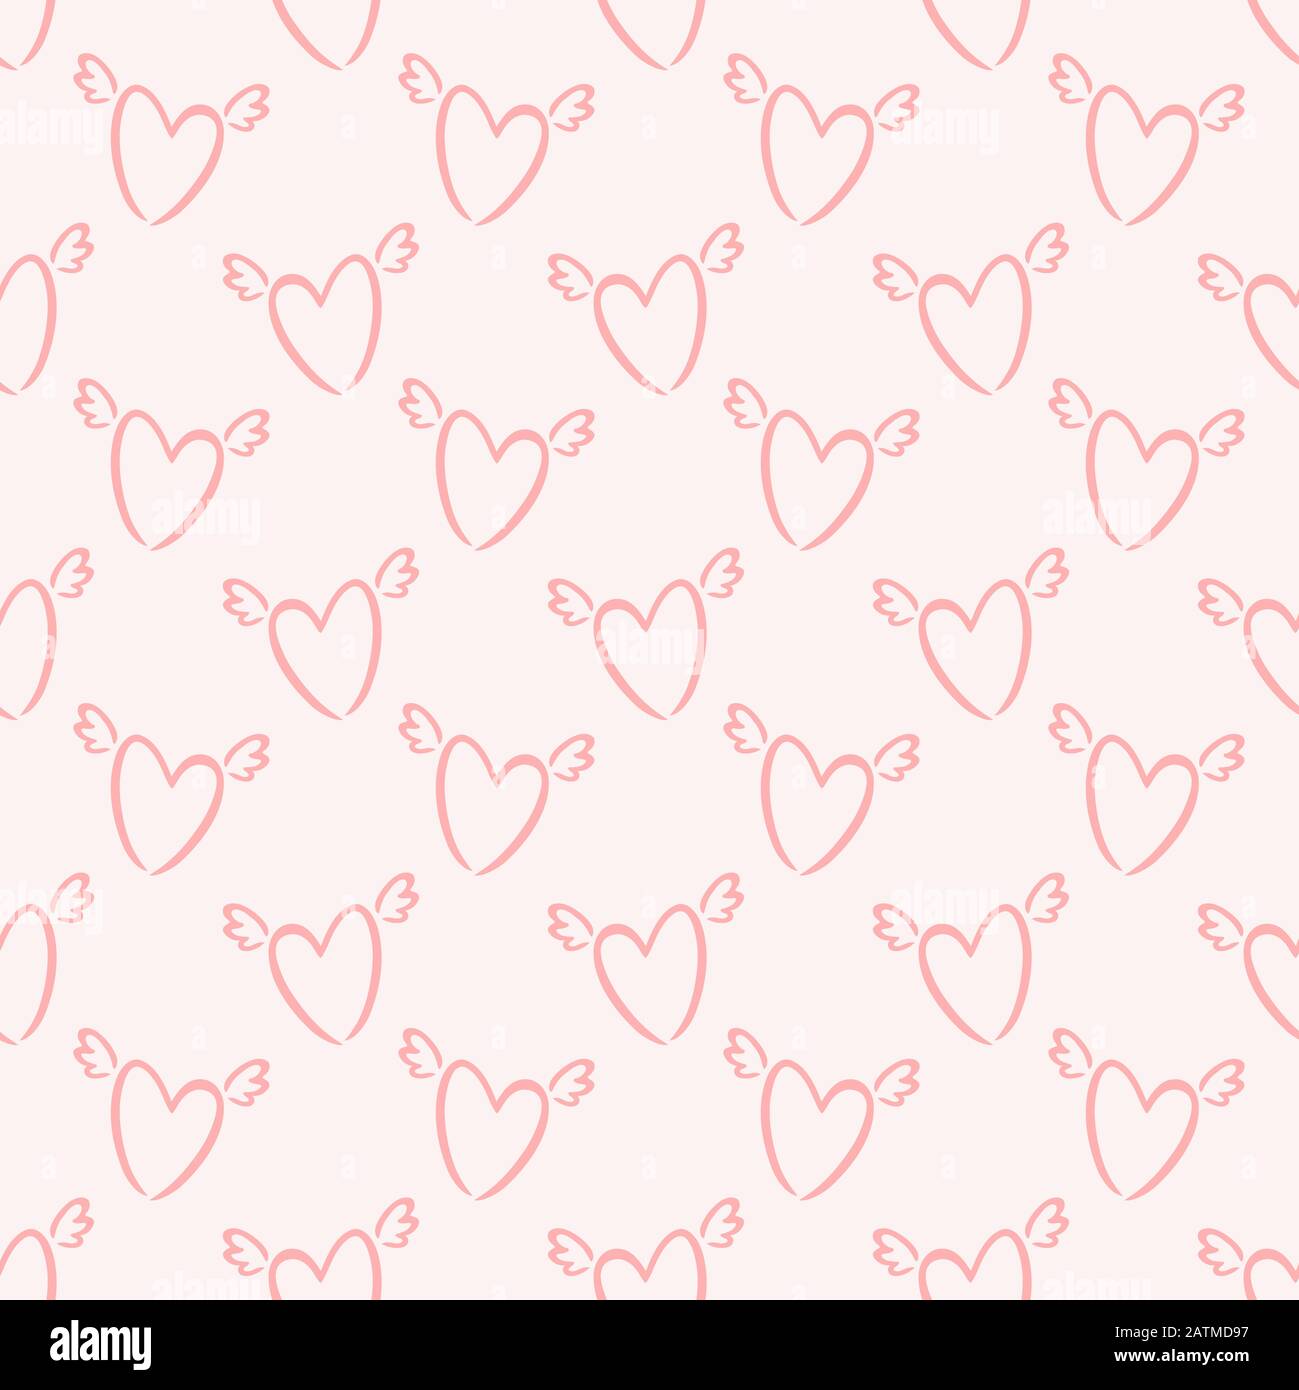 Seamless pattern with winged hearts. Pale pink background. Print for love, wedding, Valentine's day or baby design. Vector illustration. Stock Vector